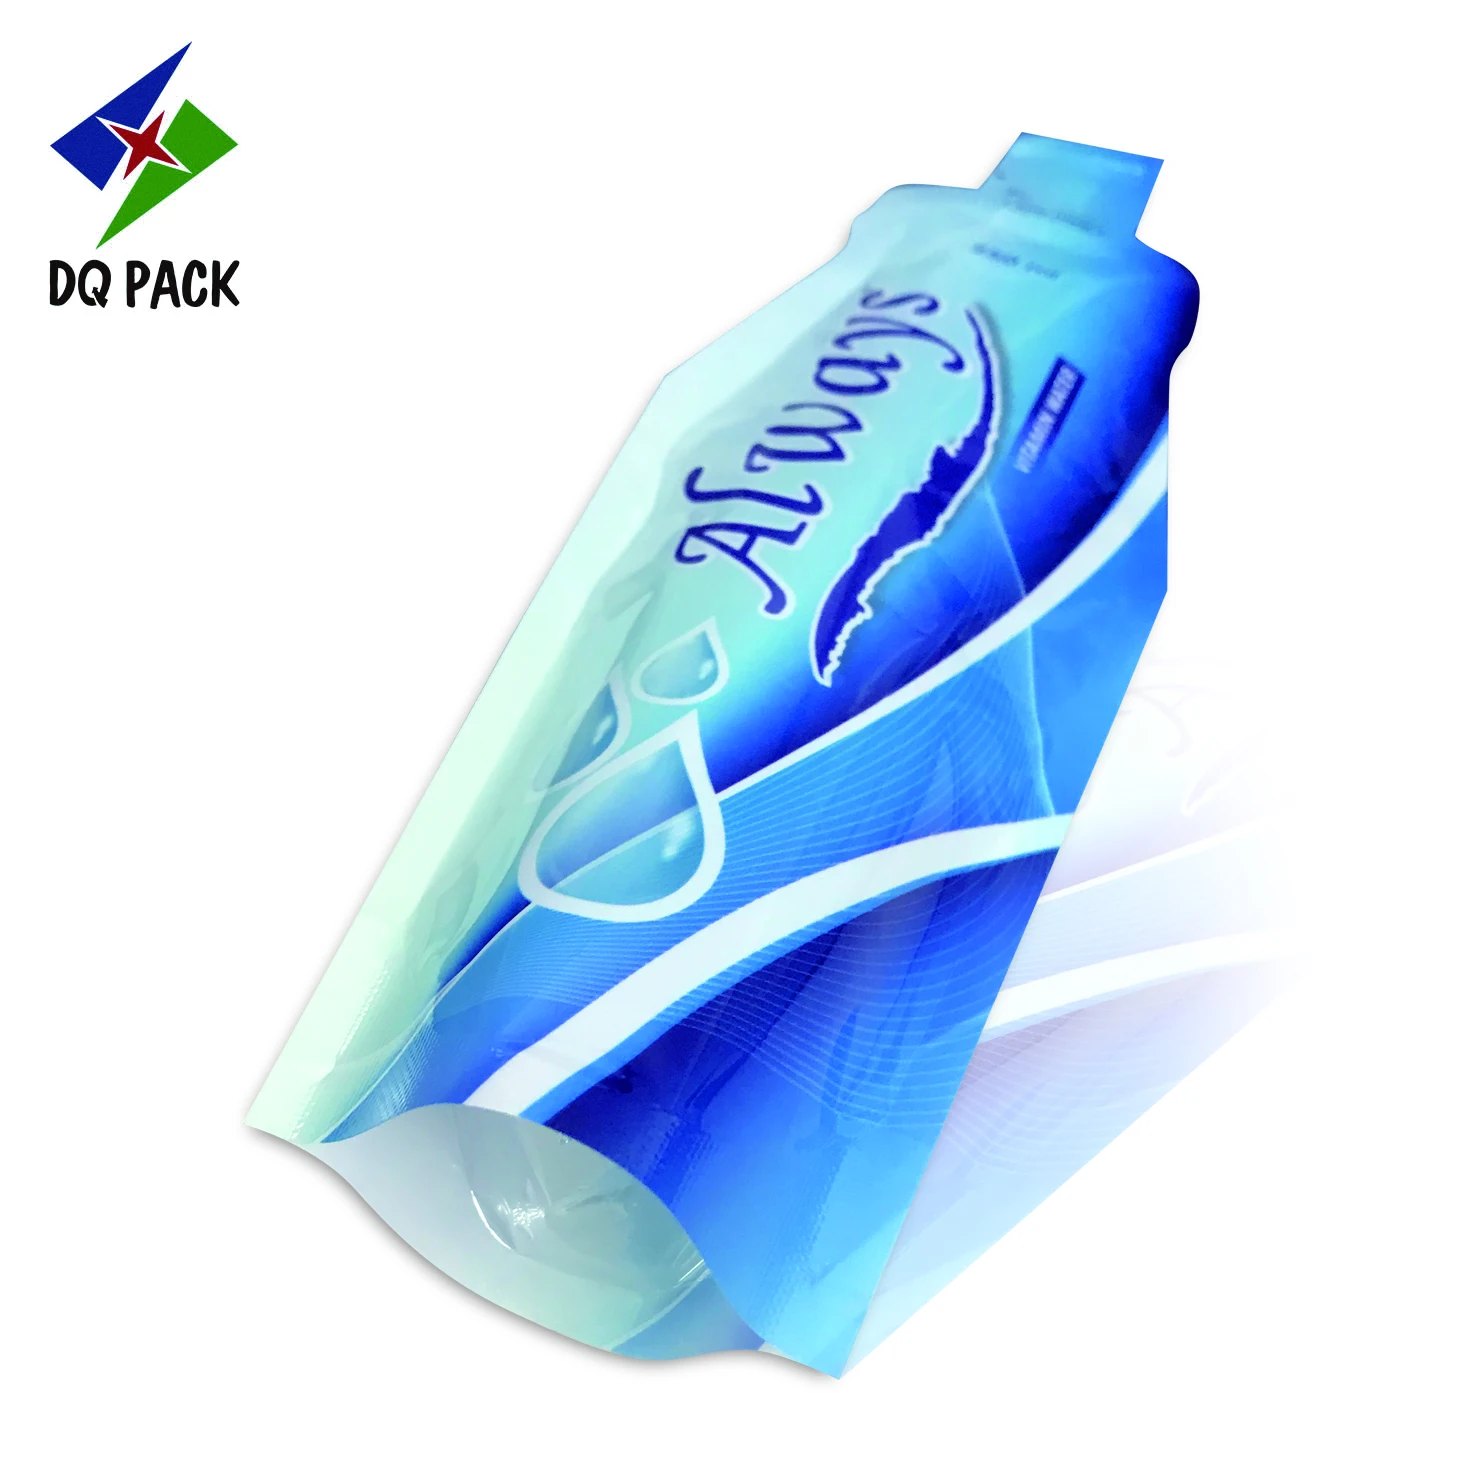 DQ PACK flexible packaging Plastic bottle fruit-shape pouch for juice food packaging pouch